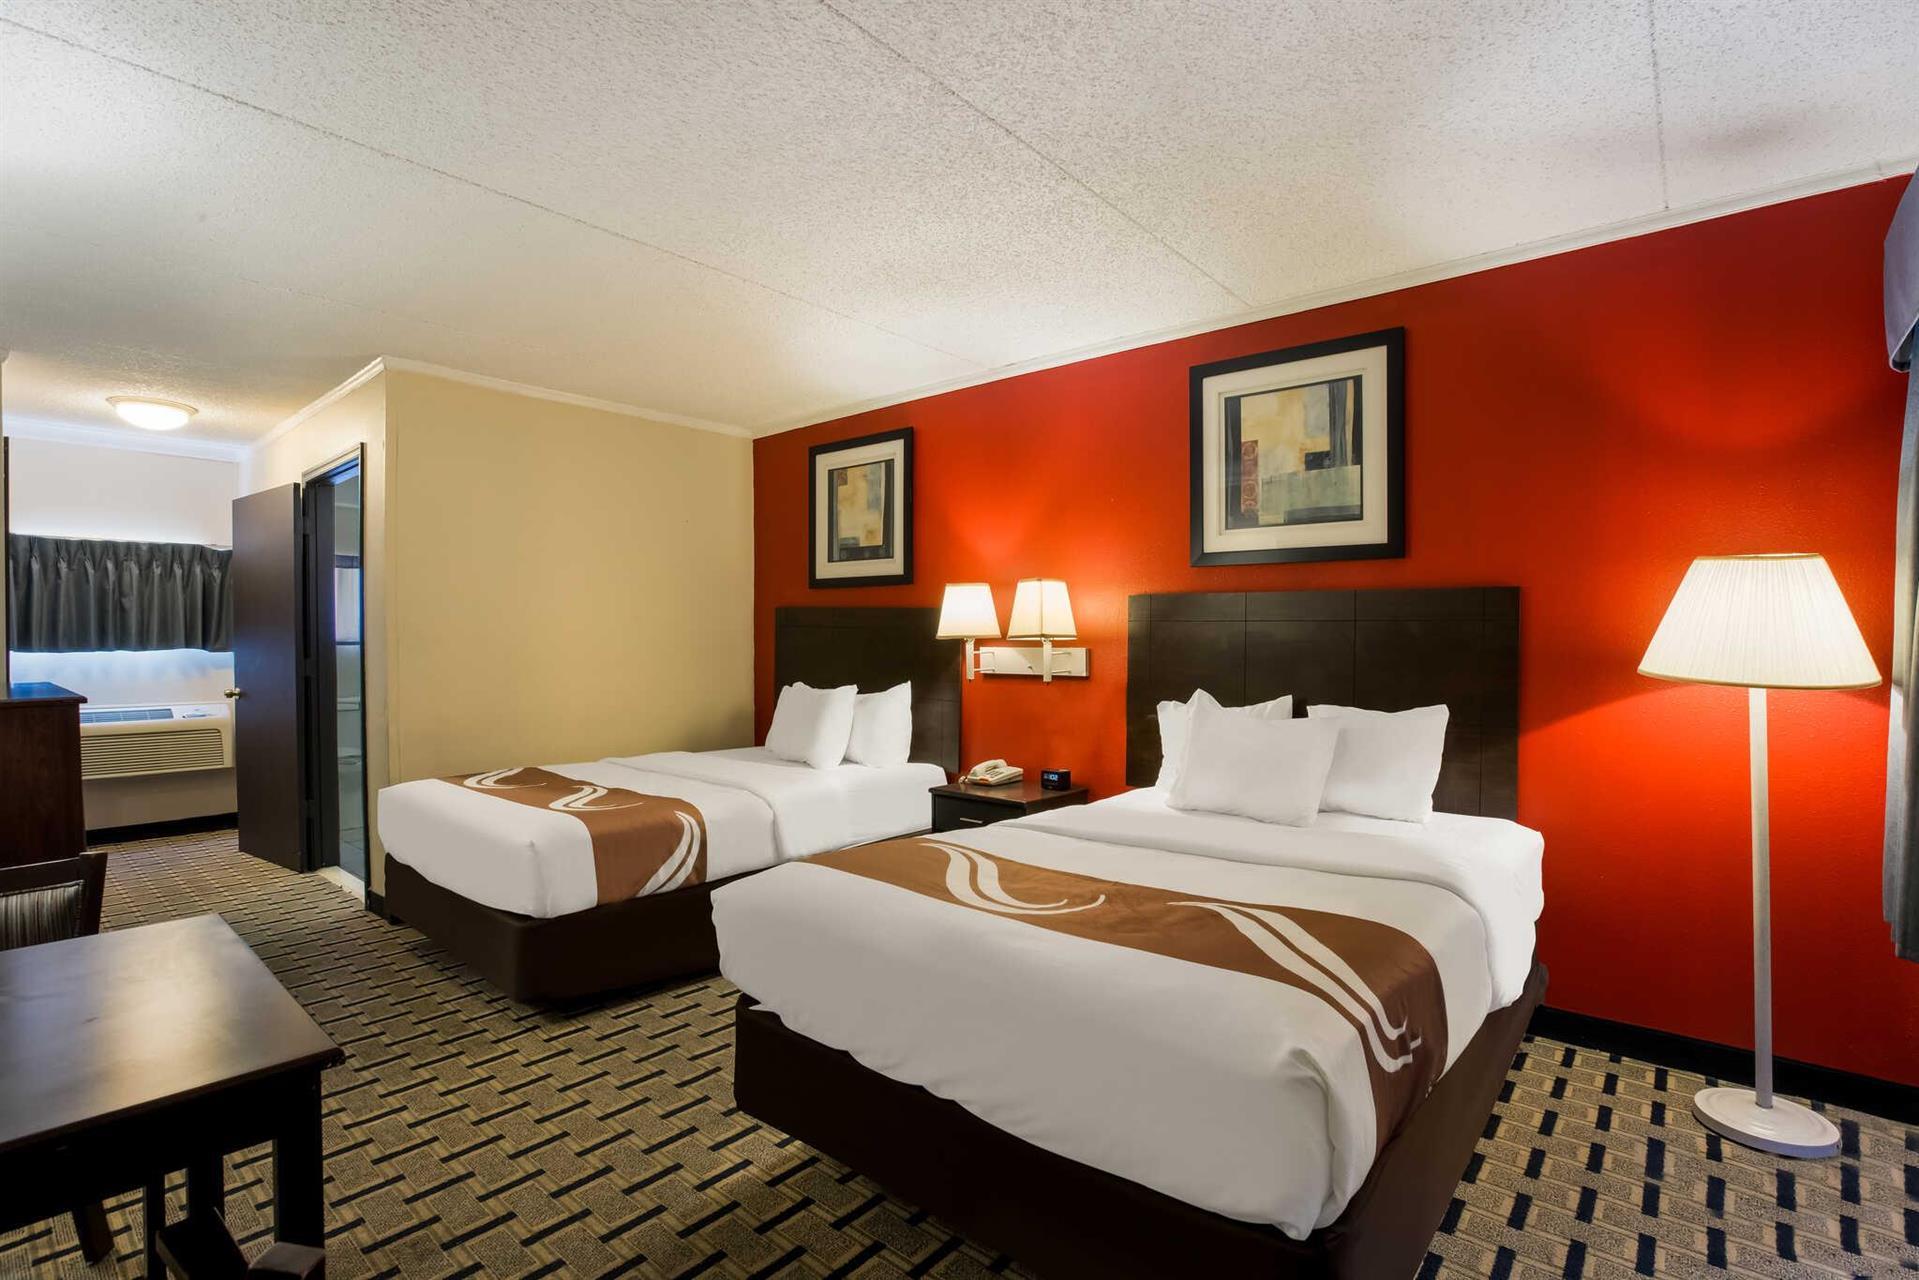 Quality Inn and Suites Millville - Vineland in Millville, NJ